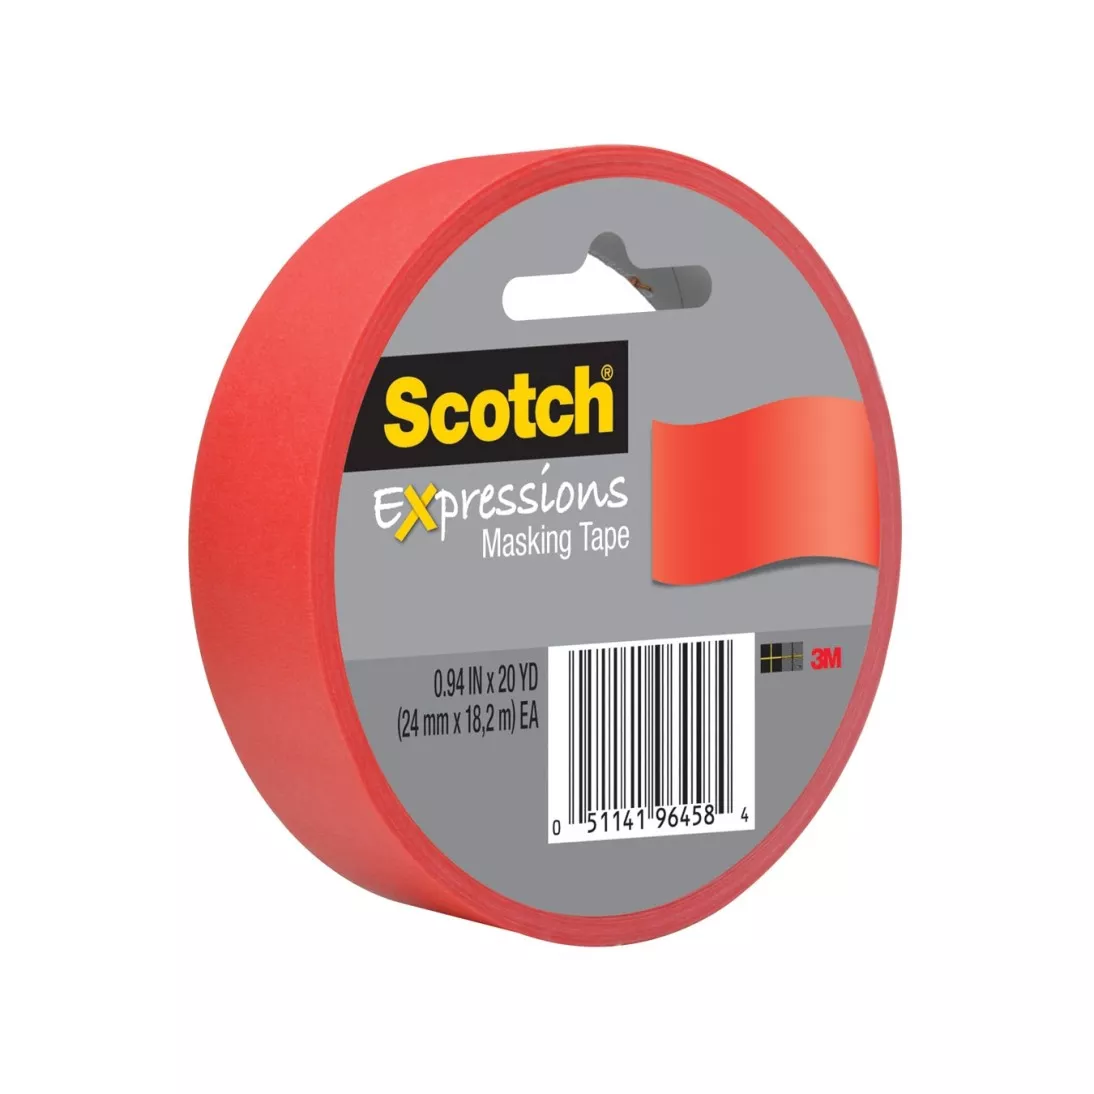 Scotch® Expressions Masking Tape, 3437-PRD-ESF, Primary Red